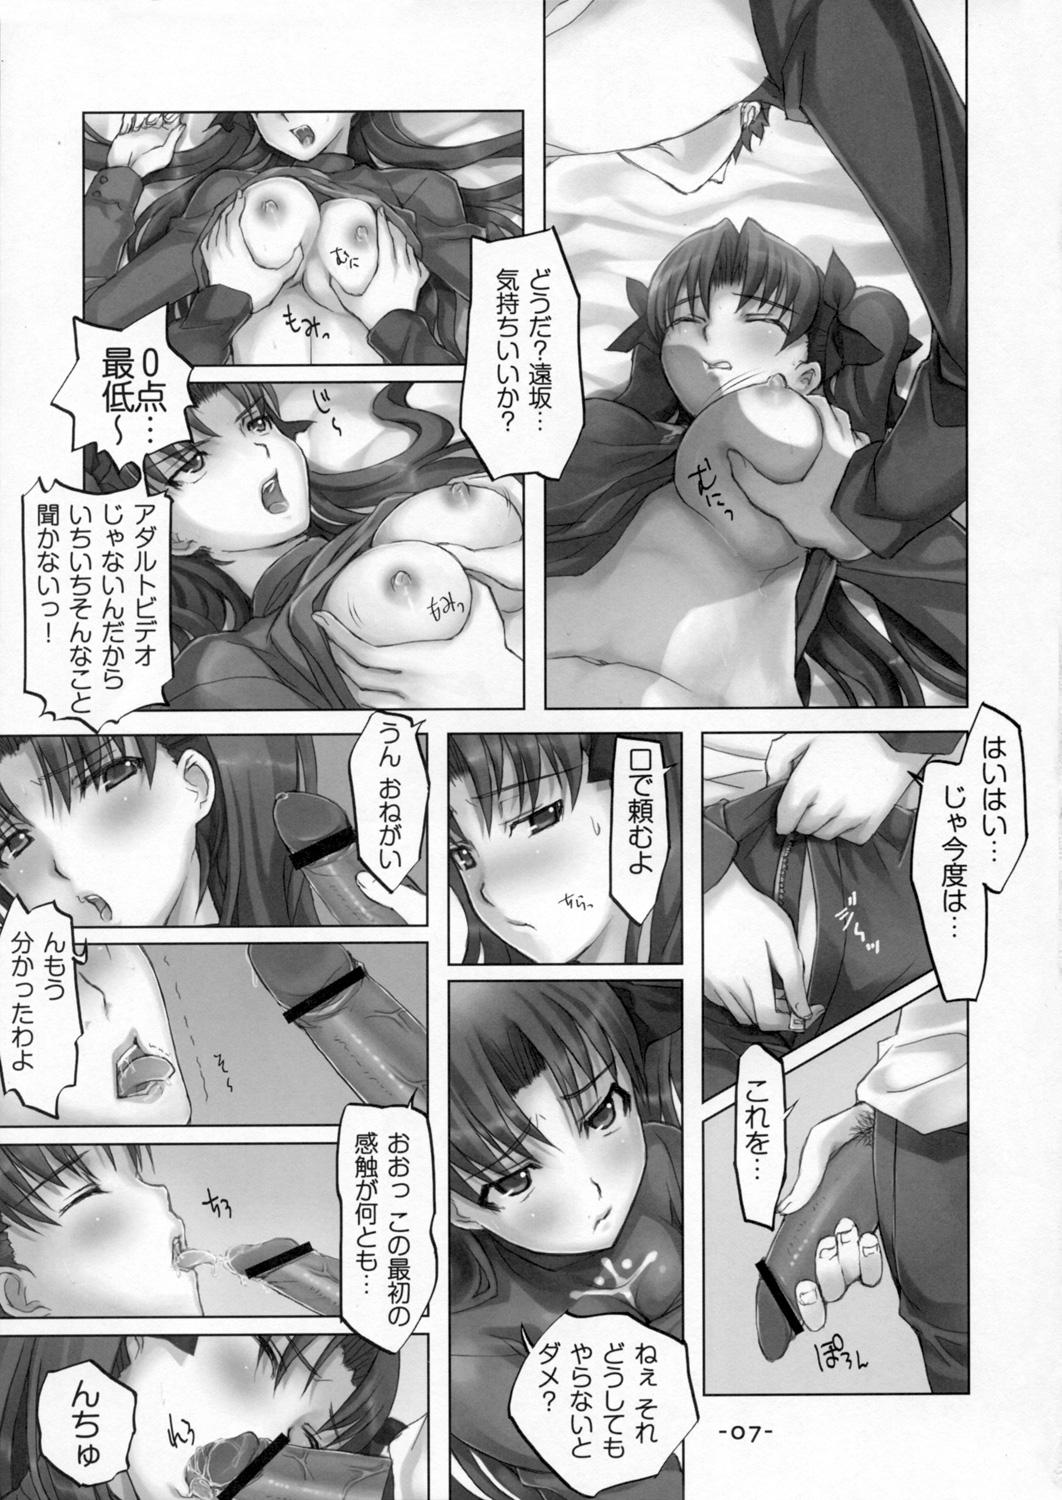 Massage DAILY LIFE - Fate stay night Fate hollow ataraxia Pornstar - Page 6